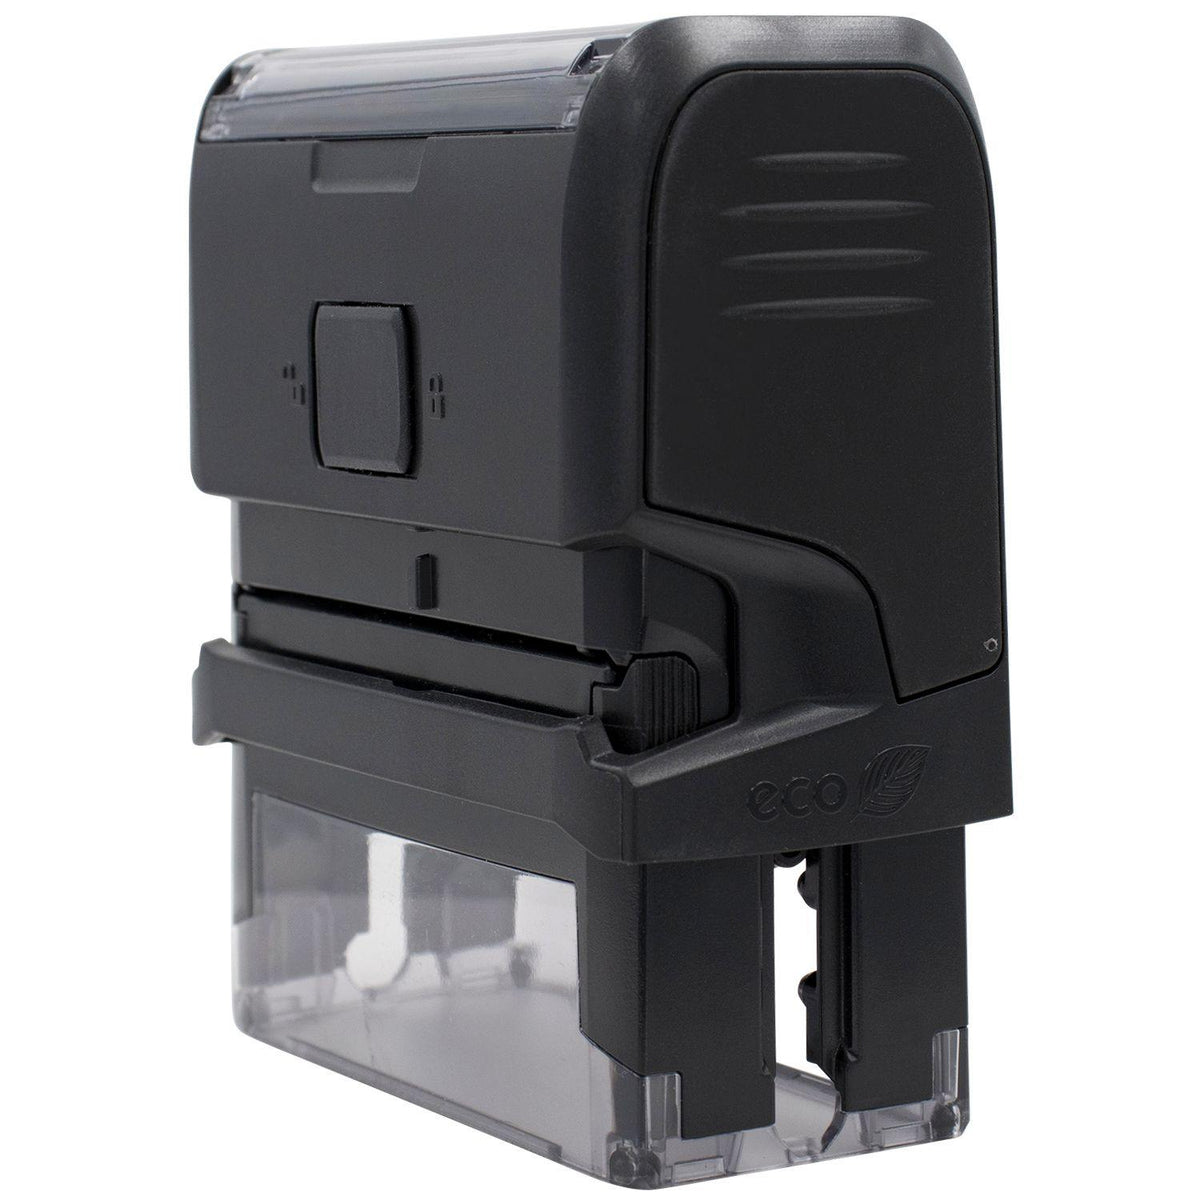 Self Inking Second Notice Stamp - Engineer Seal Stamps - Brand_Trodat, Impression Size_Small, Stamp Type_Self-Inking Stamp, Type of Use_Office, Type of Use_Postal &amp; Mailing, Type of Use_Shipping &amp; Receiving